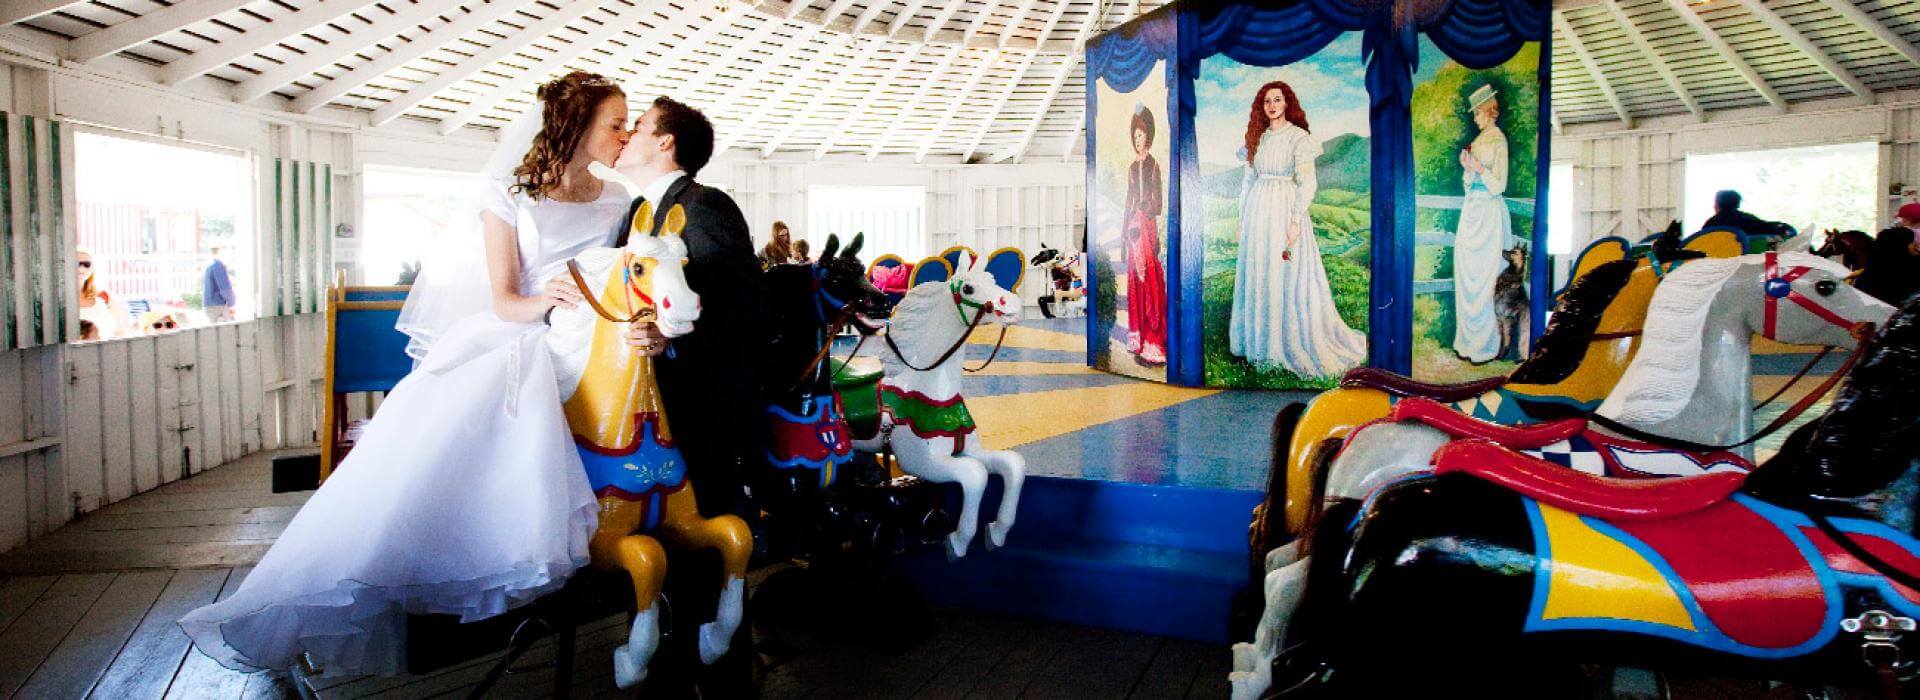 couple sitting on a hose in the carousel just married